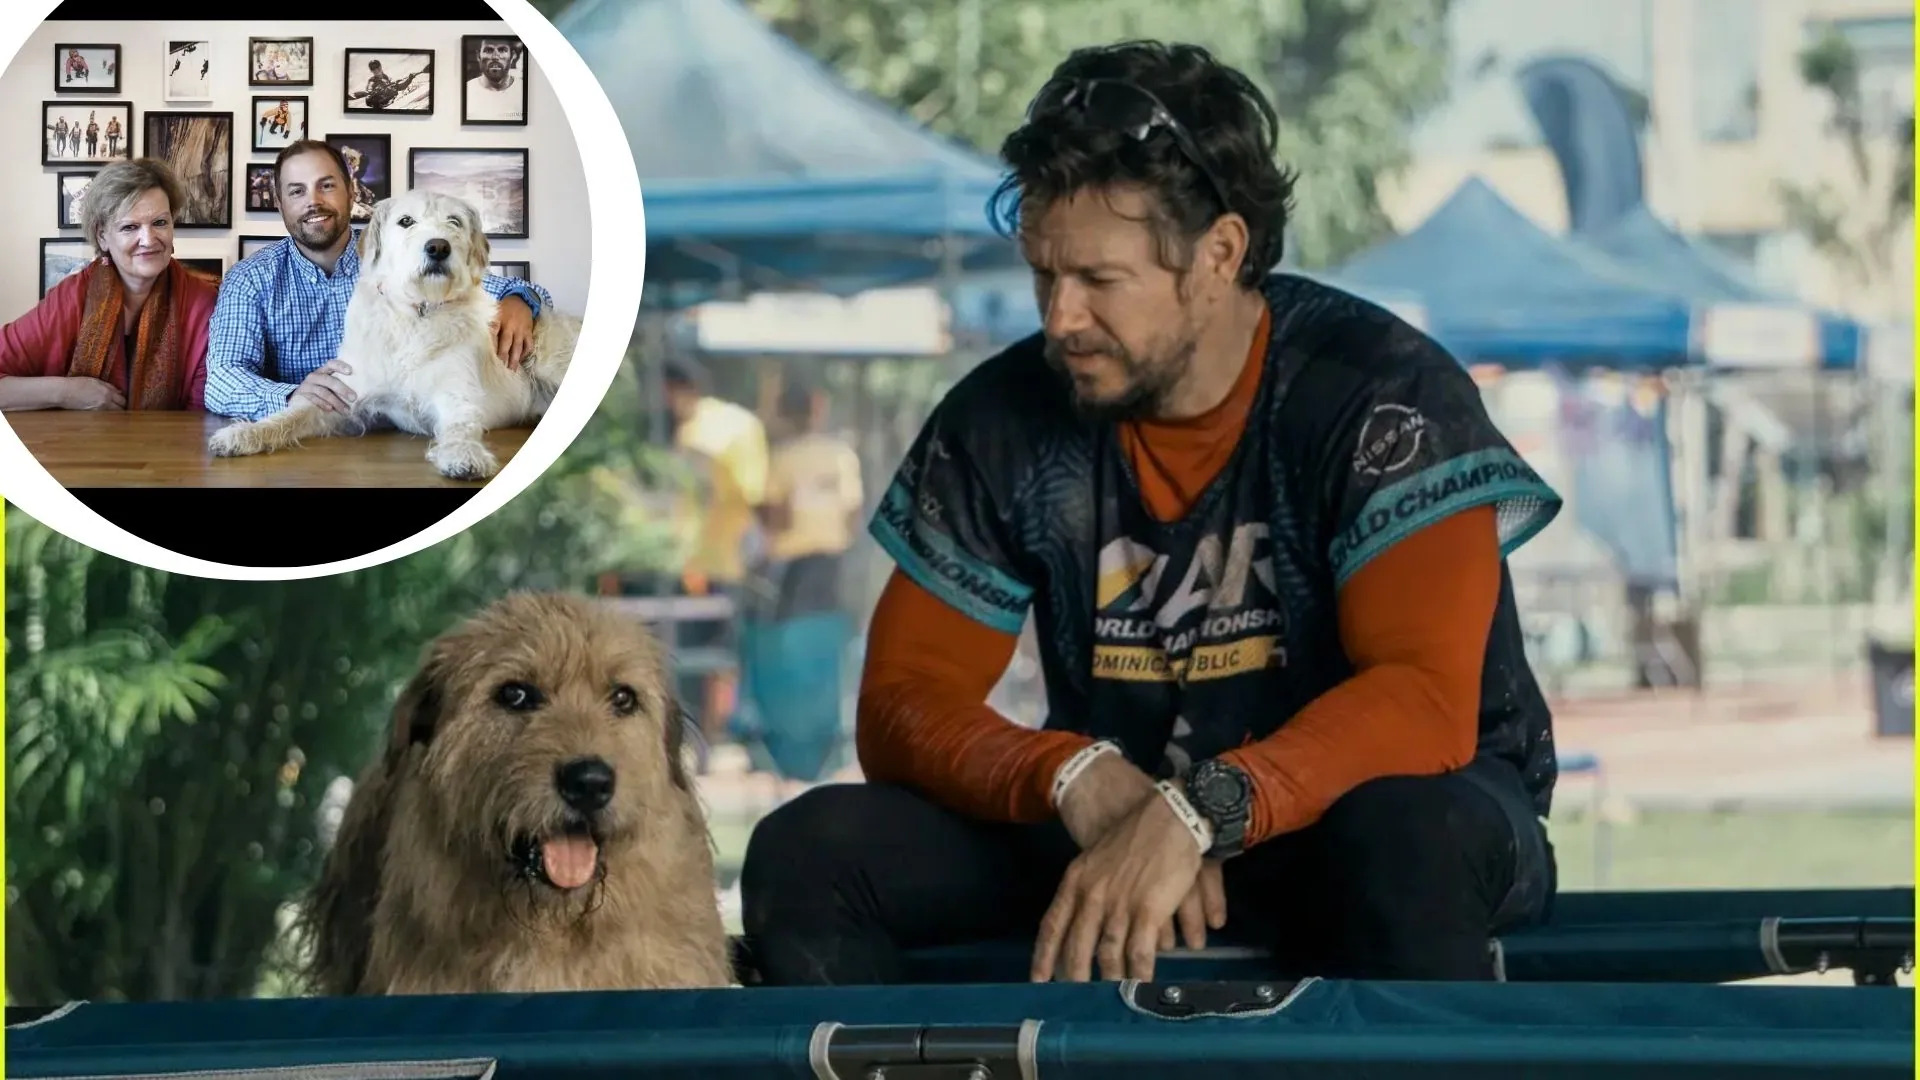 Mark Wahlberg Stars in Uplifting Adventure Film Arthur the King Inspired by True Story